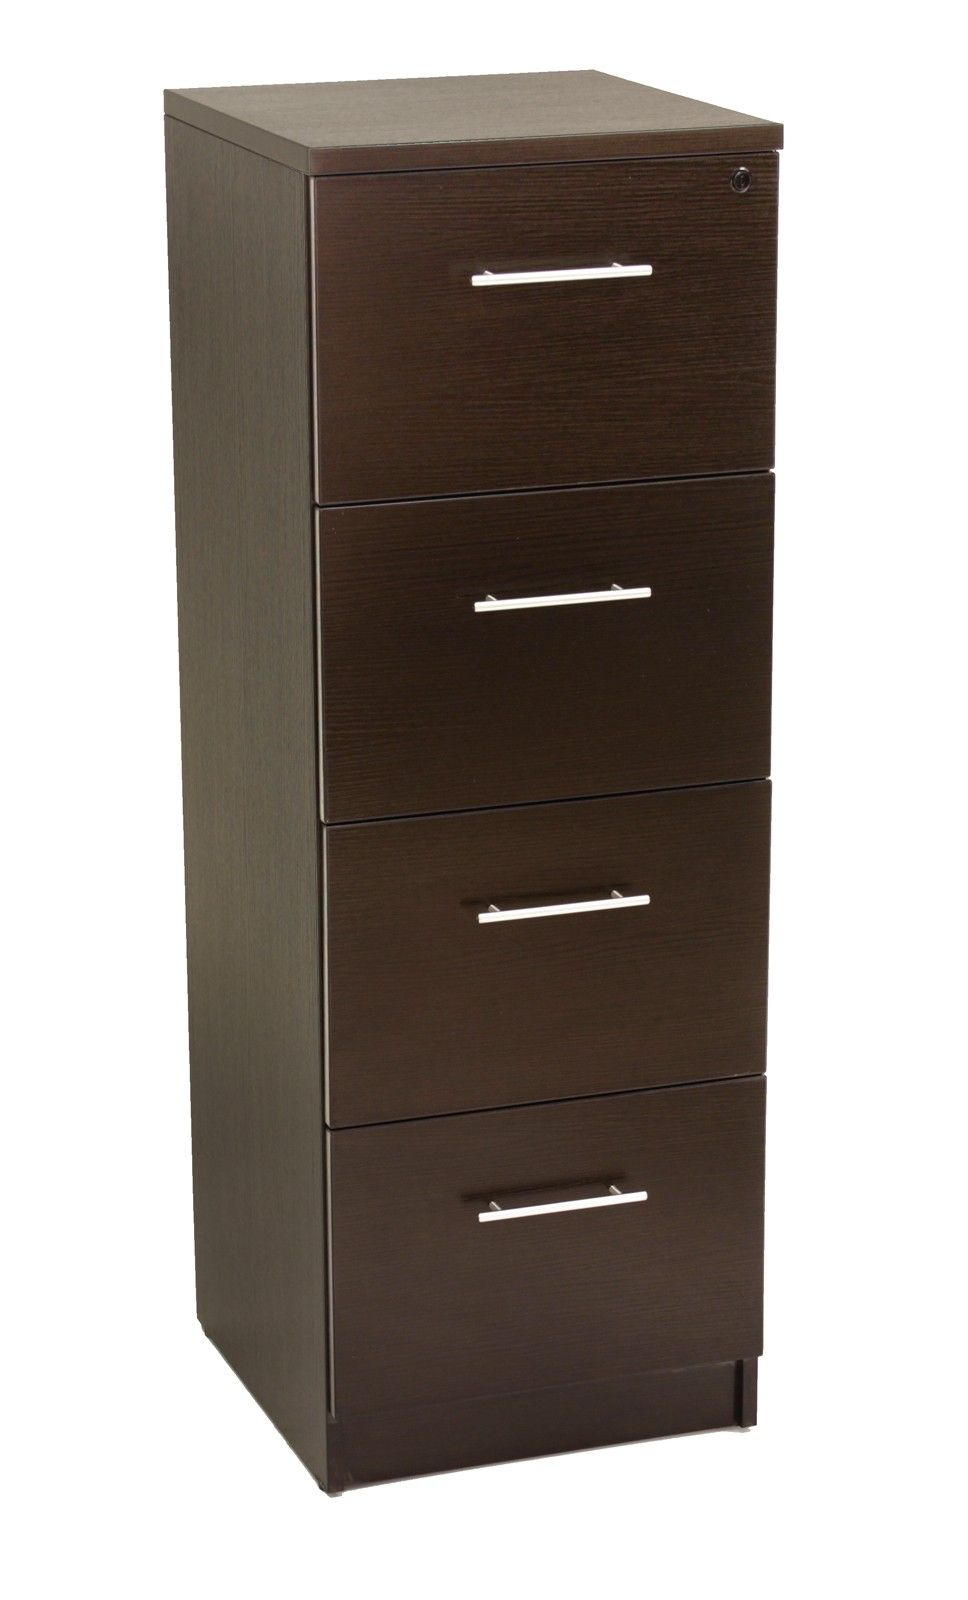 Unique 100 Collection 4 Drawer Vertical File Cabinet Espresso In for sizing 968 X 1600